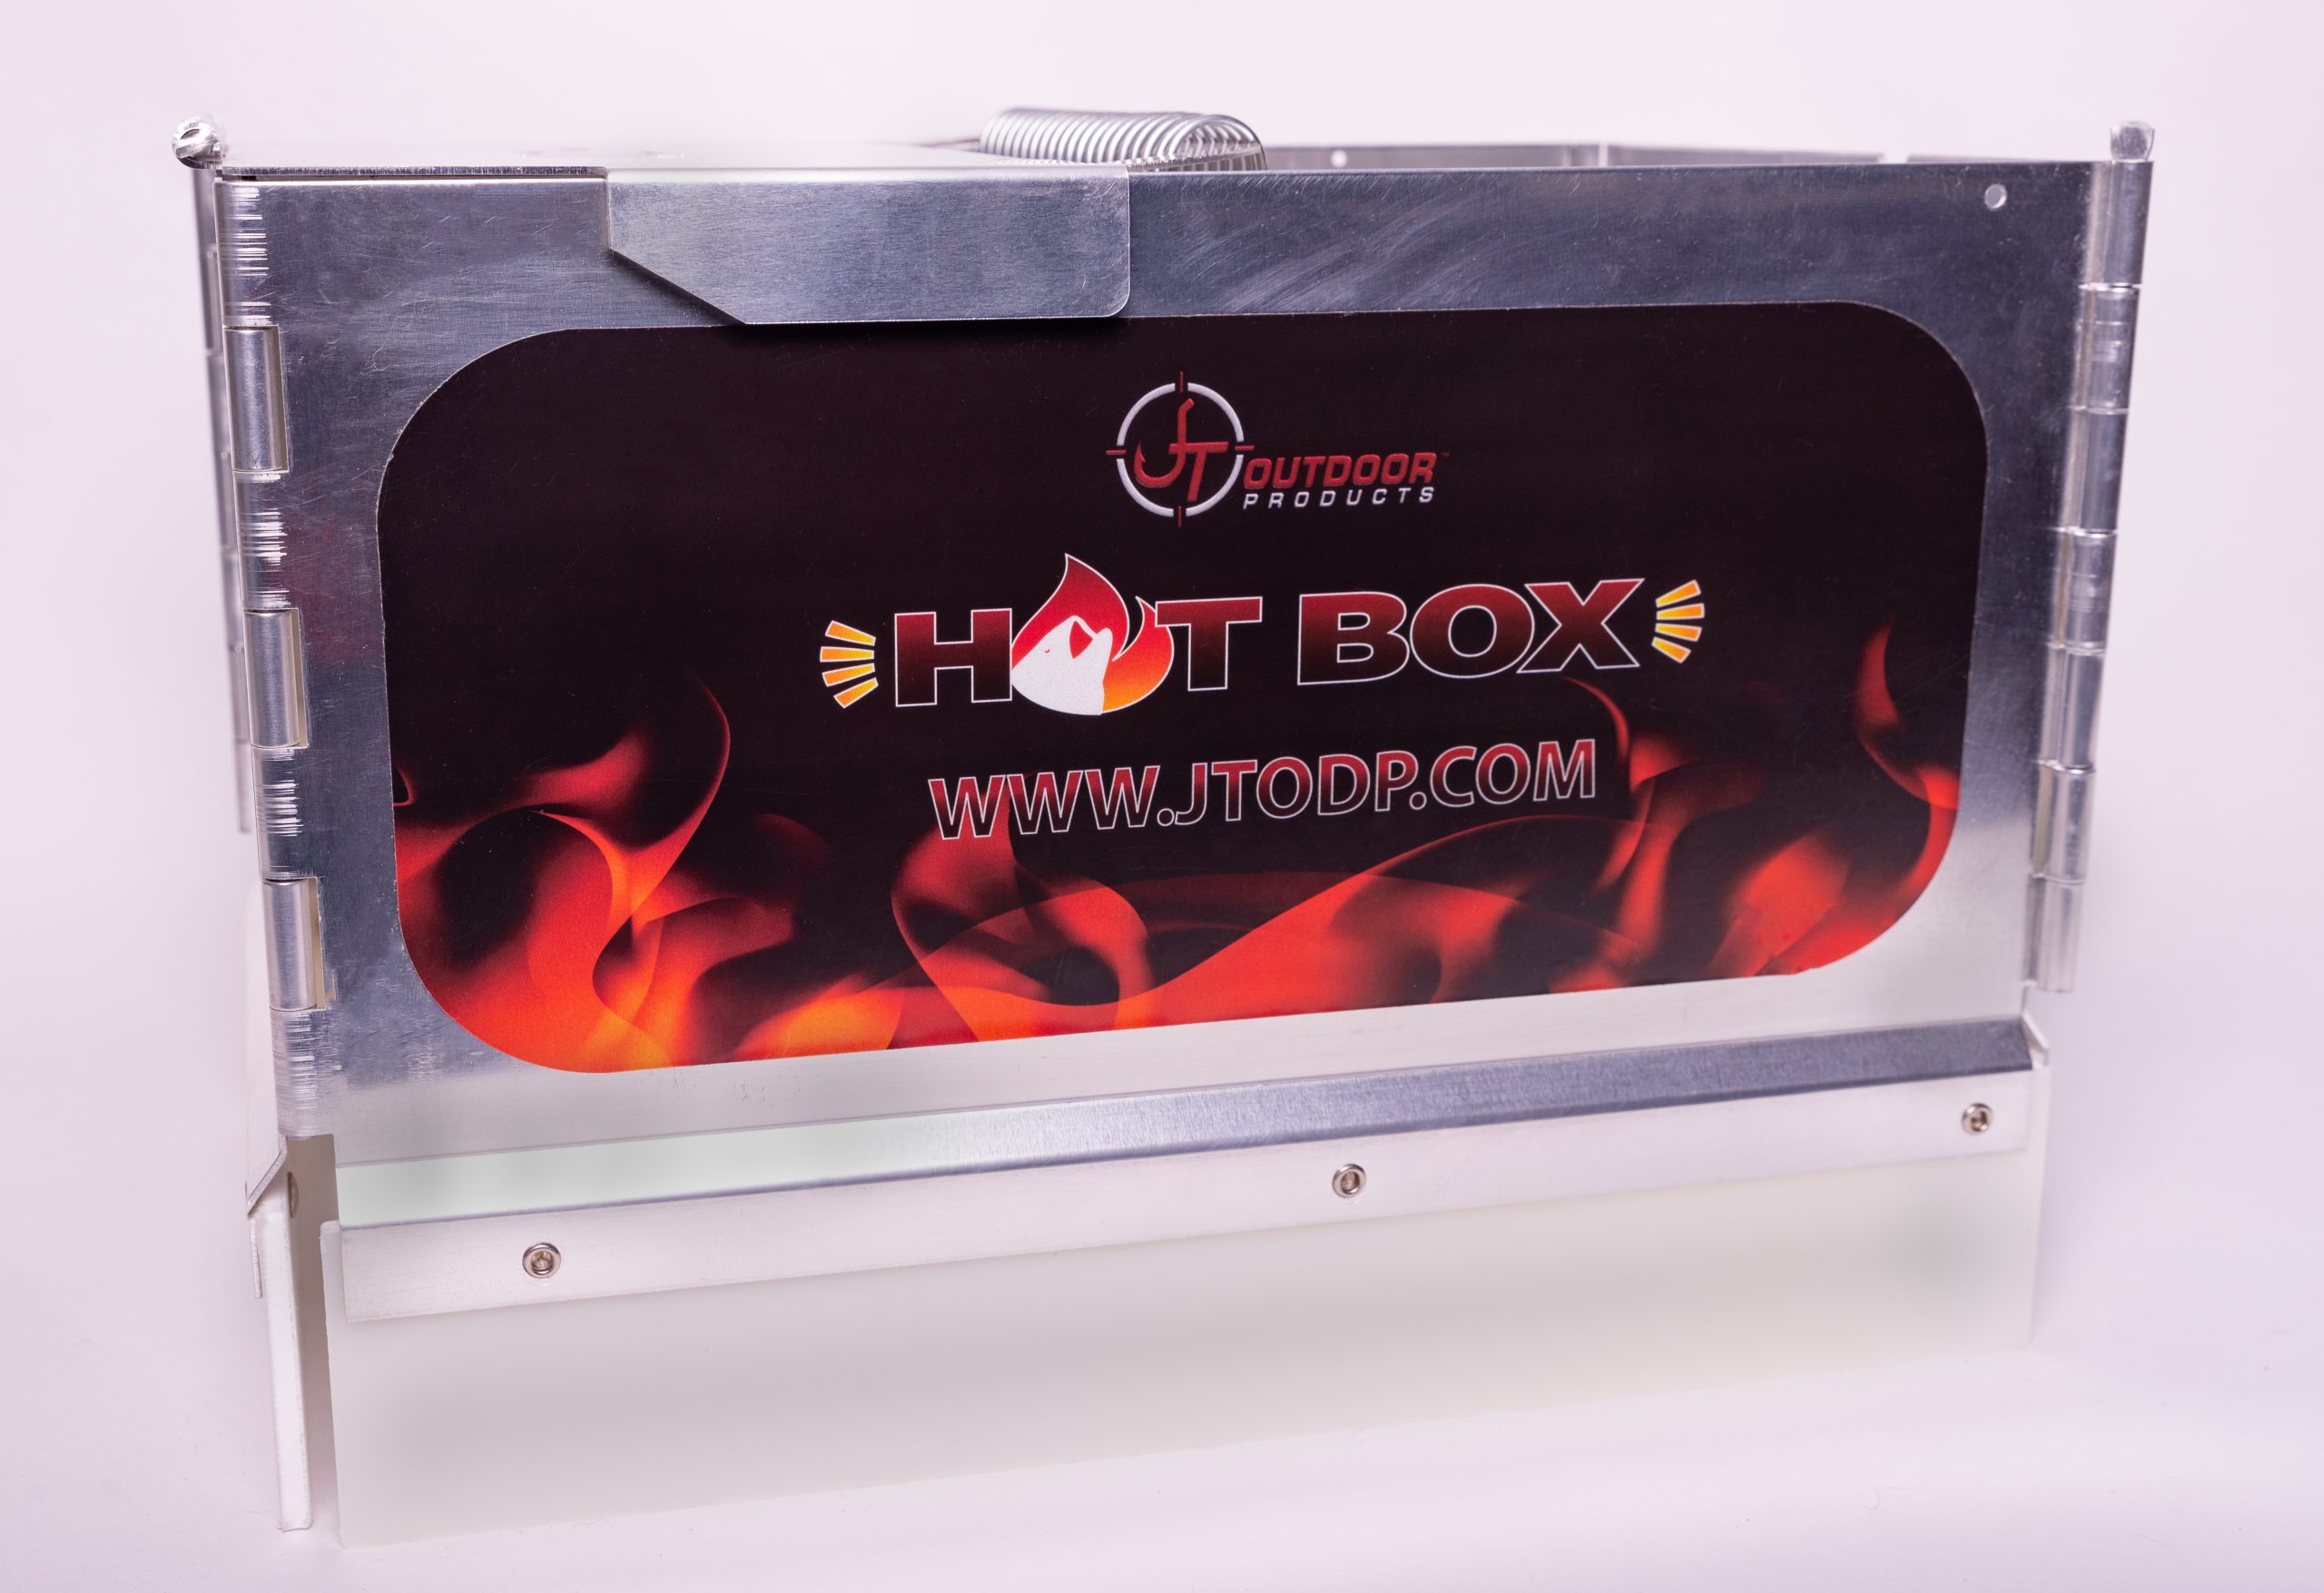 Hot Box - JT Outdoor Products